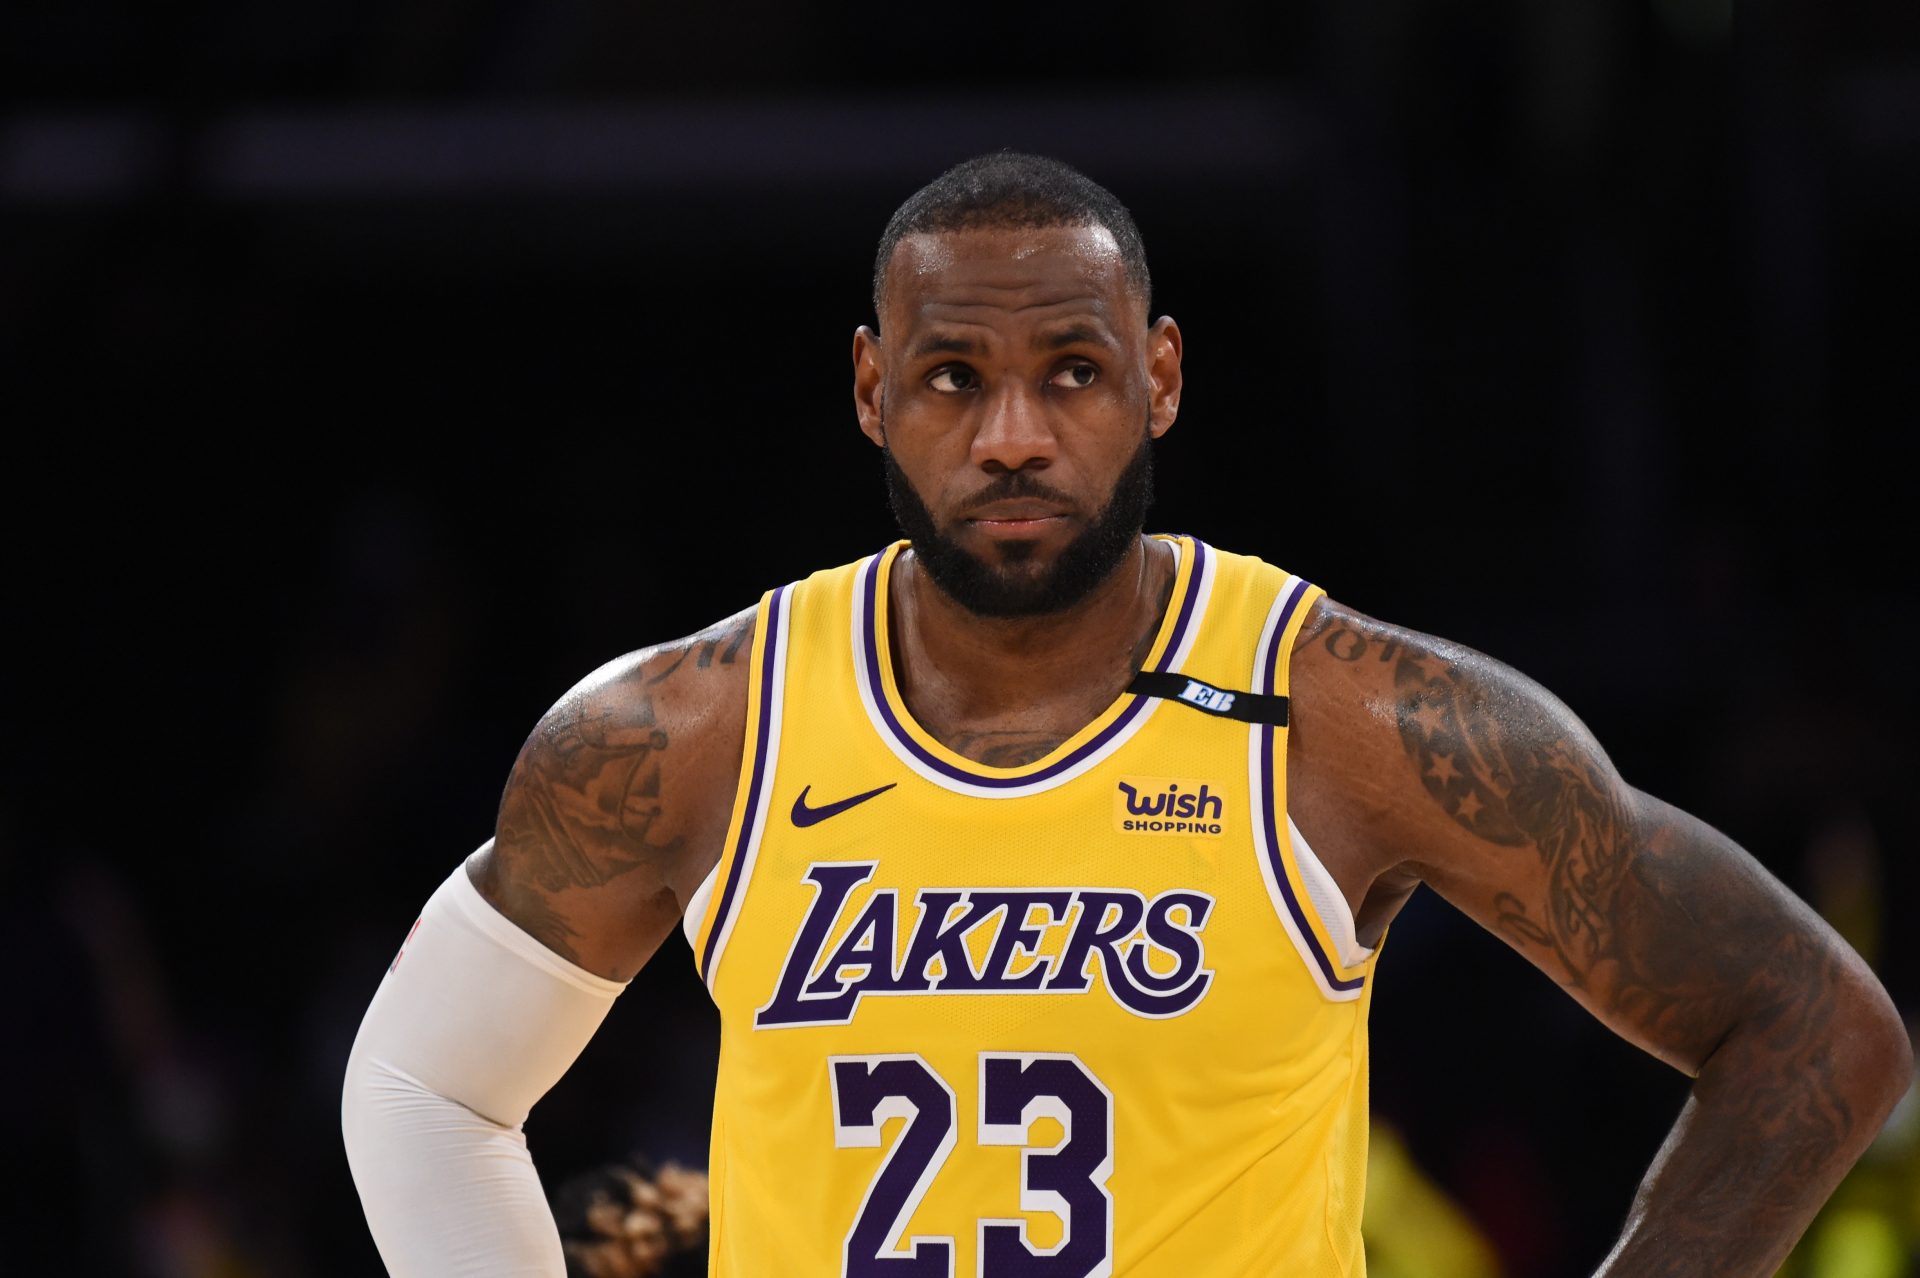 Spears: Lakers’ LeBron James ‘Playing on 1 Leg’ in Playoffs as a consequence of Ankle Injury